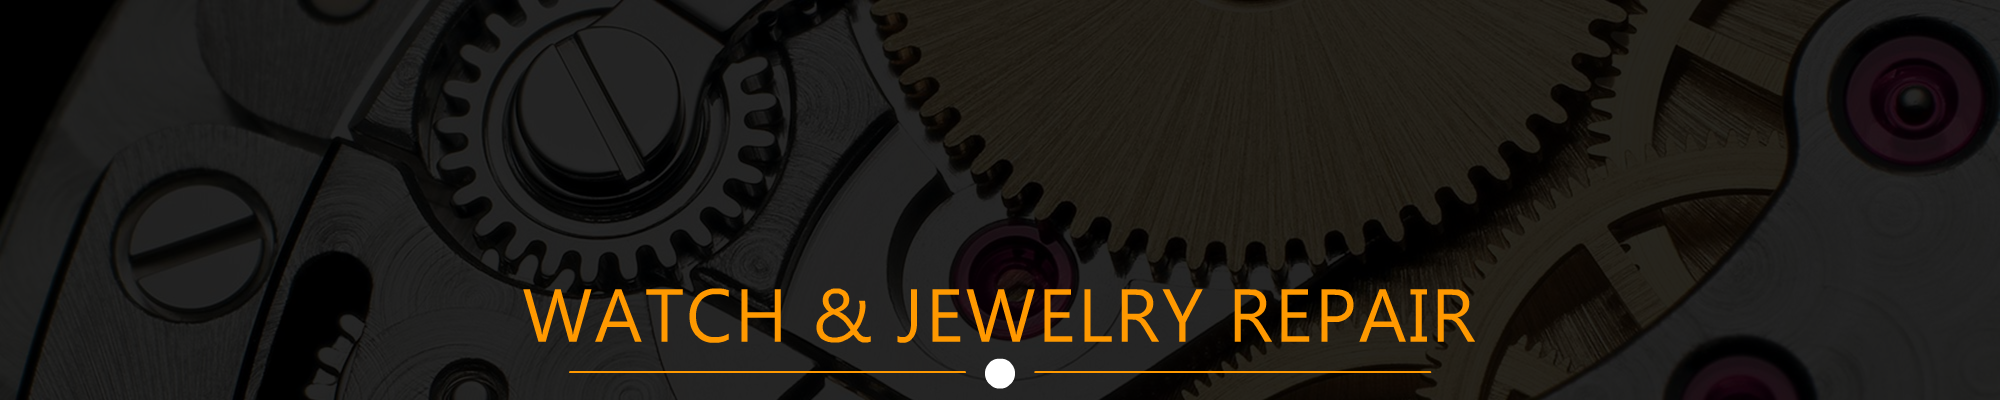 Jewelry By Giorgio, a banner image, watch & jewelry repair